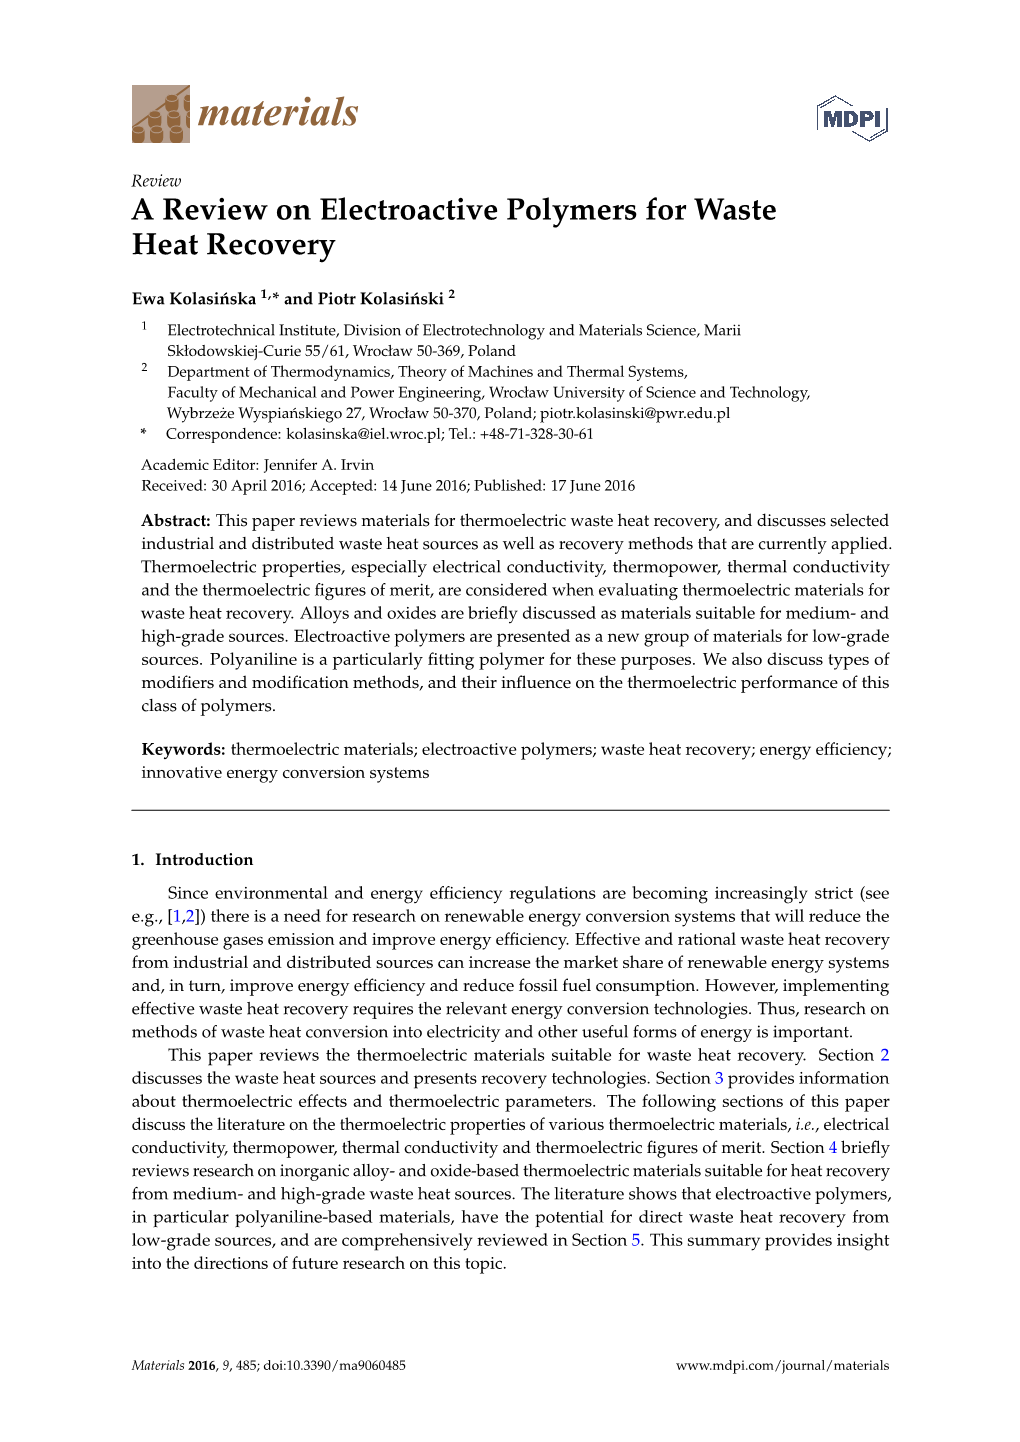 A Review on Electroactive Polymers for Waste Heat Recovery